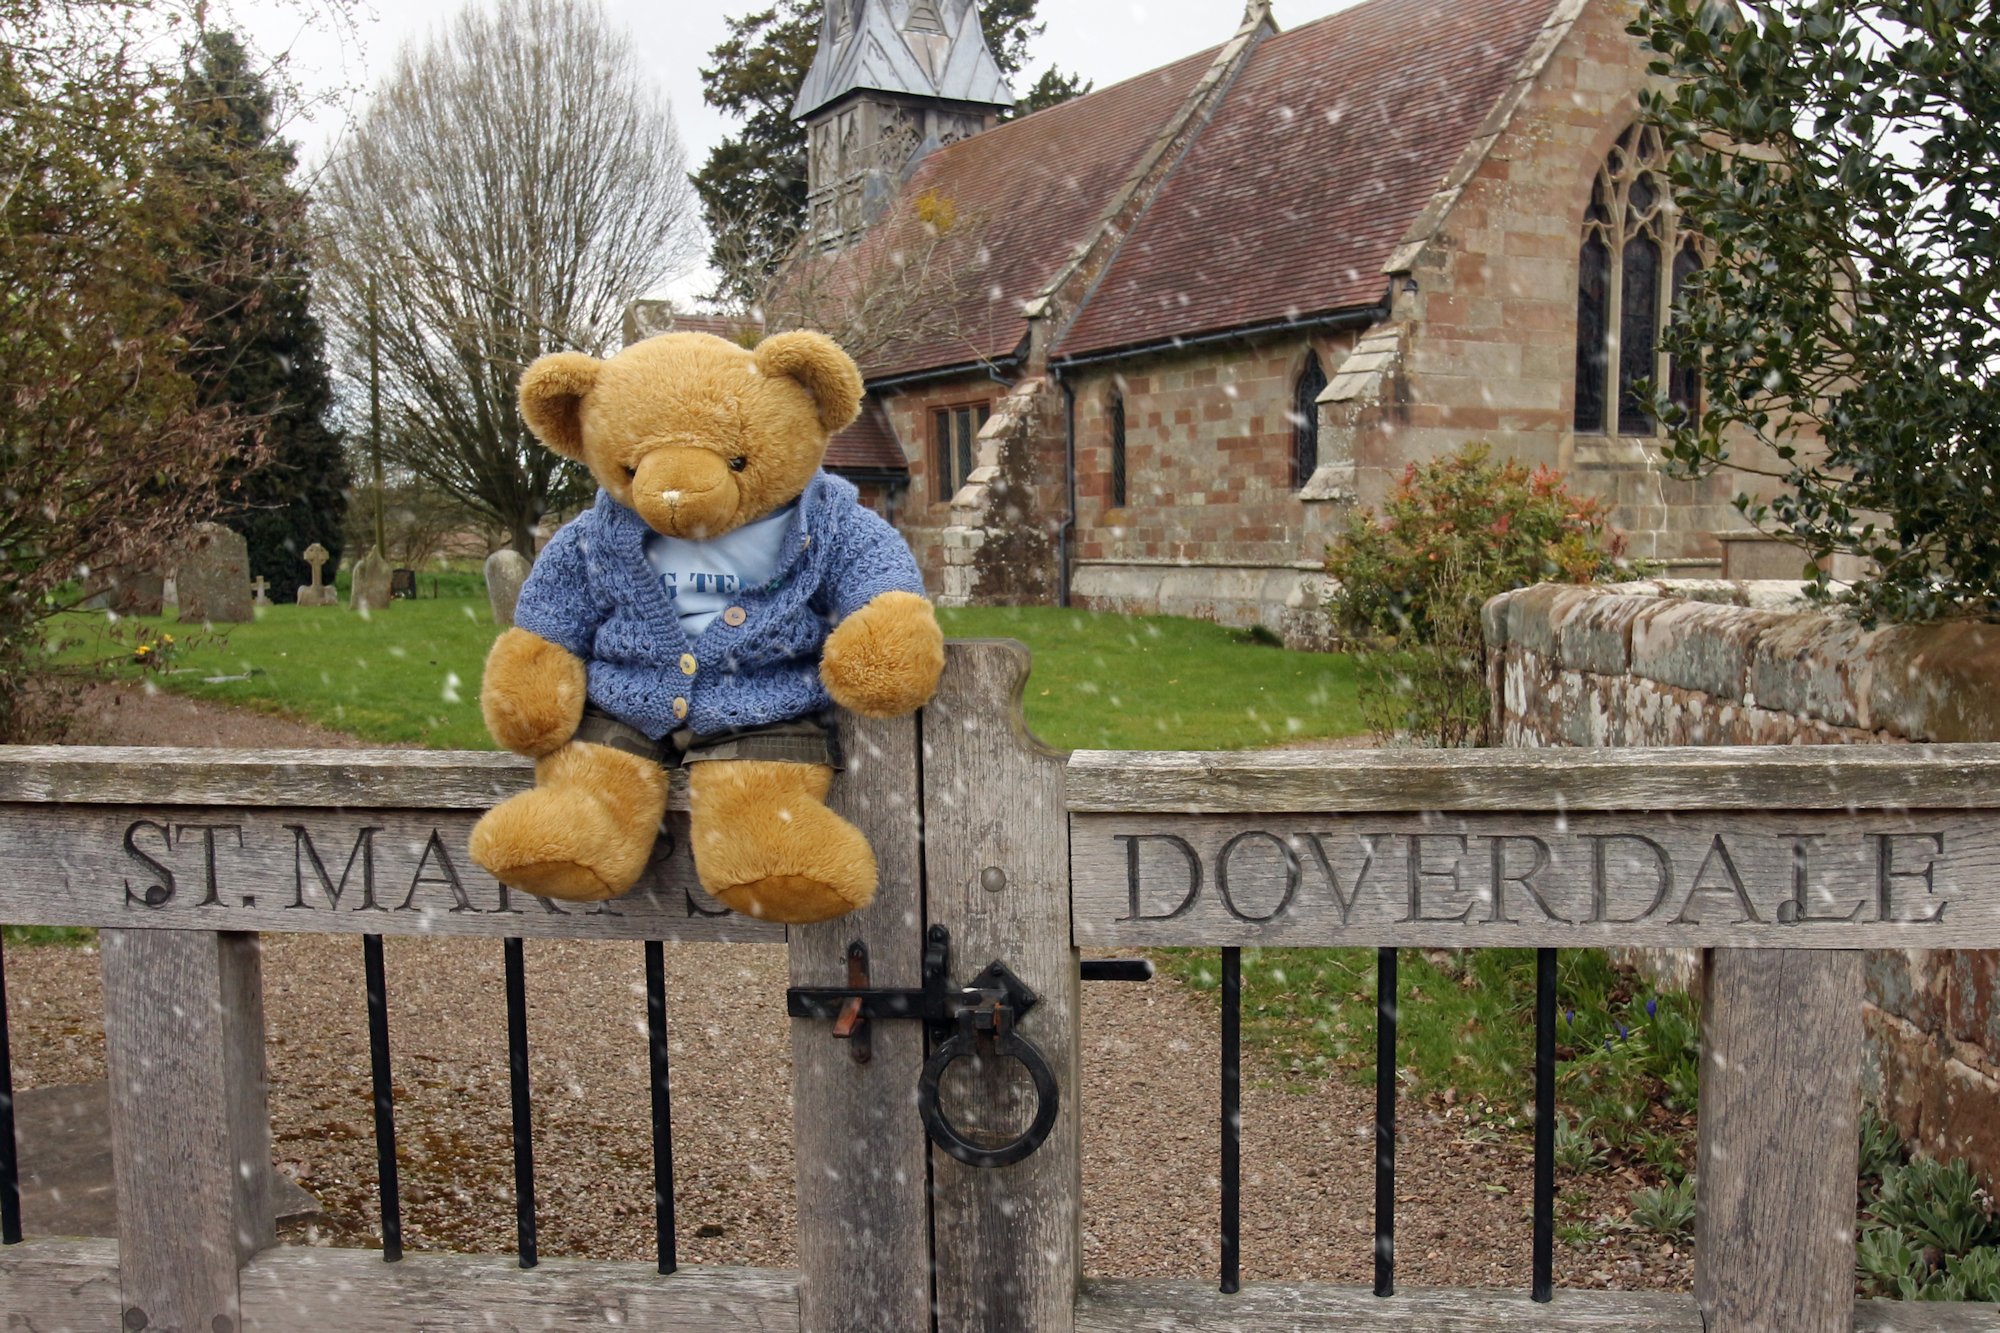 Doverdale, Worcestershire (369)